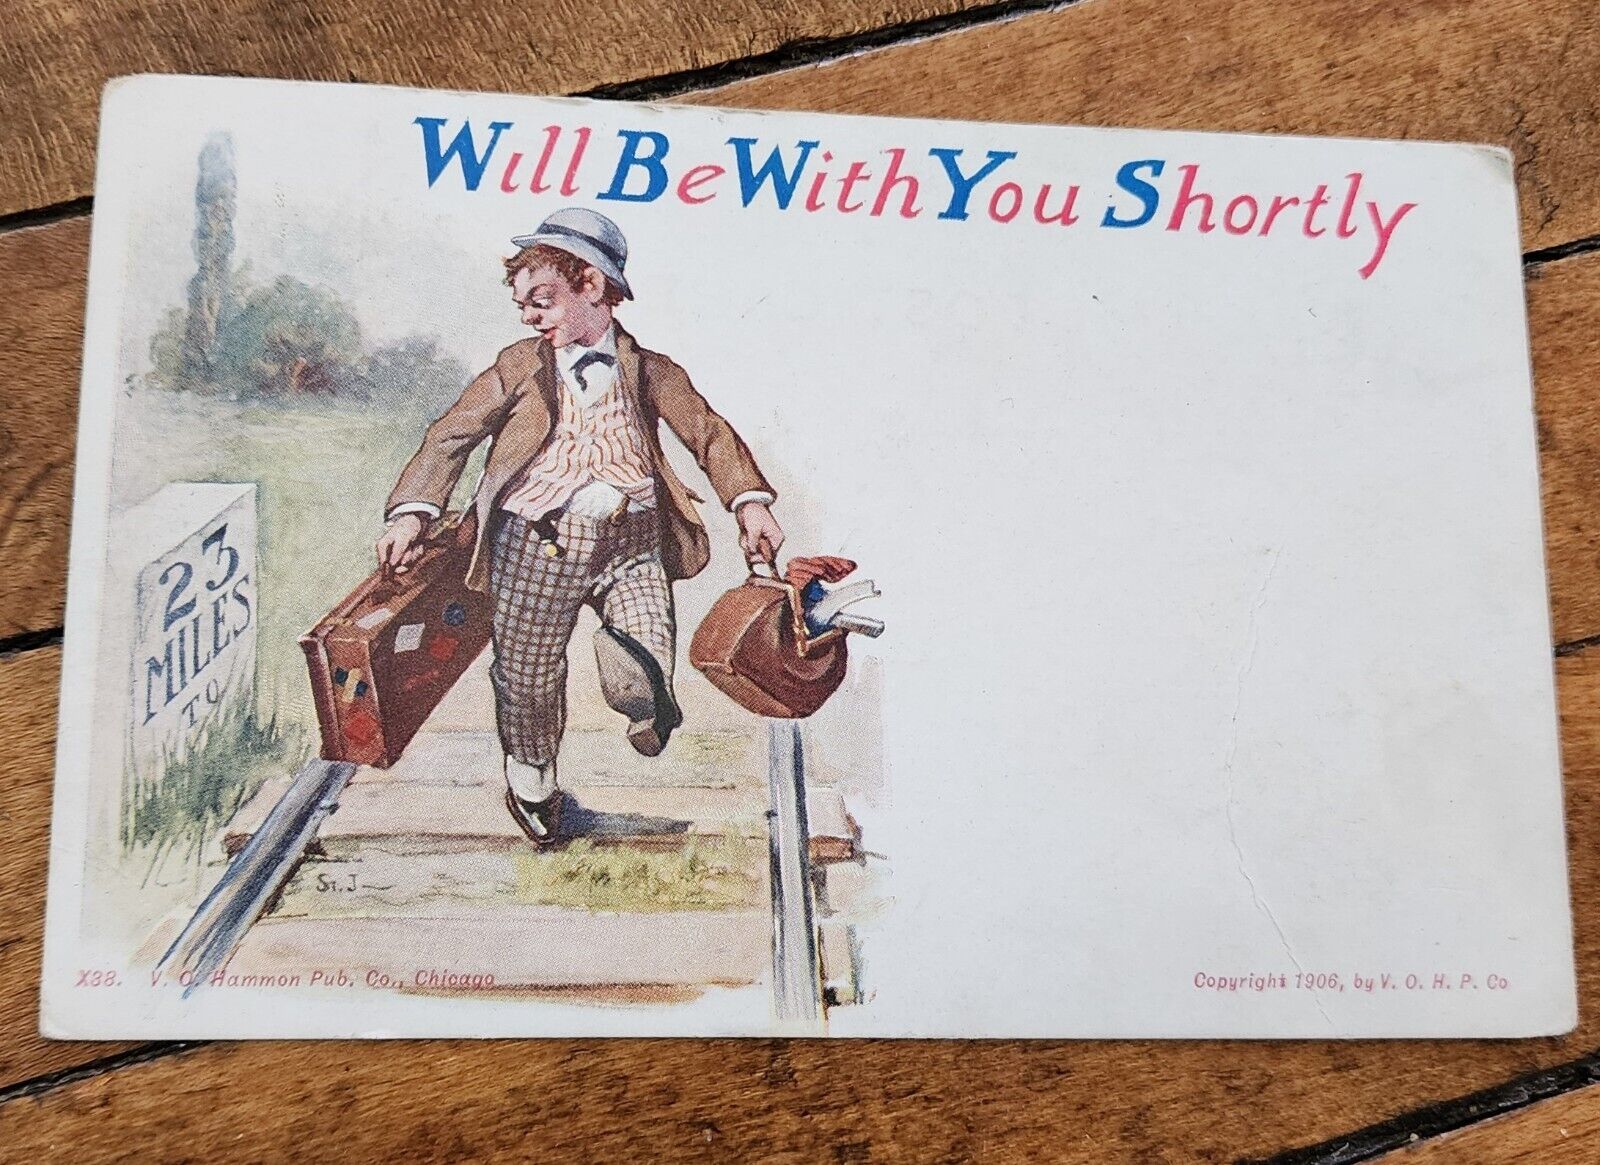 Vtg 1909 Humorous Litho Postcard WILL BE WITH YOU SHORTLY Man on Railroad Track